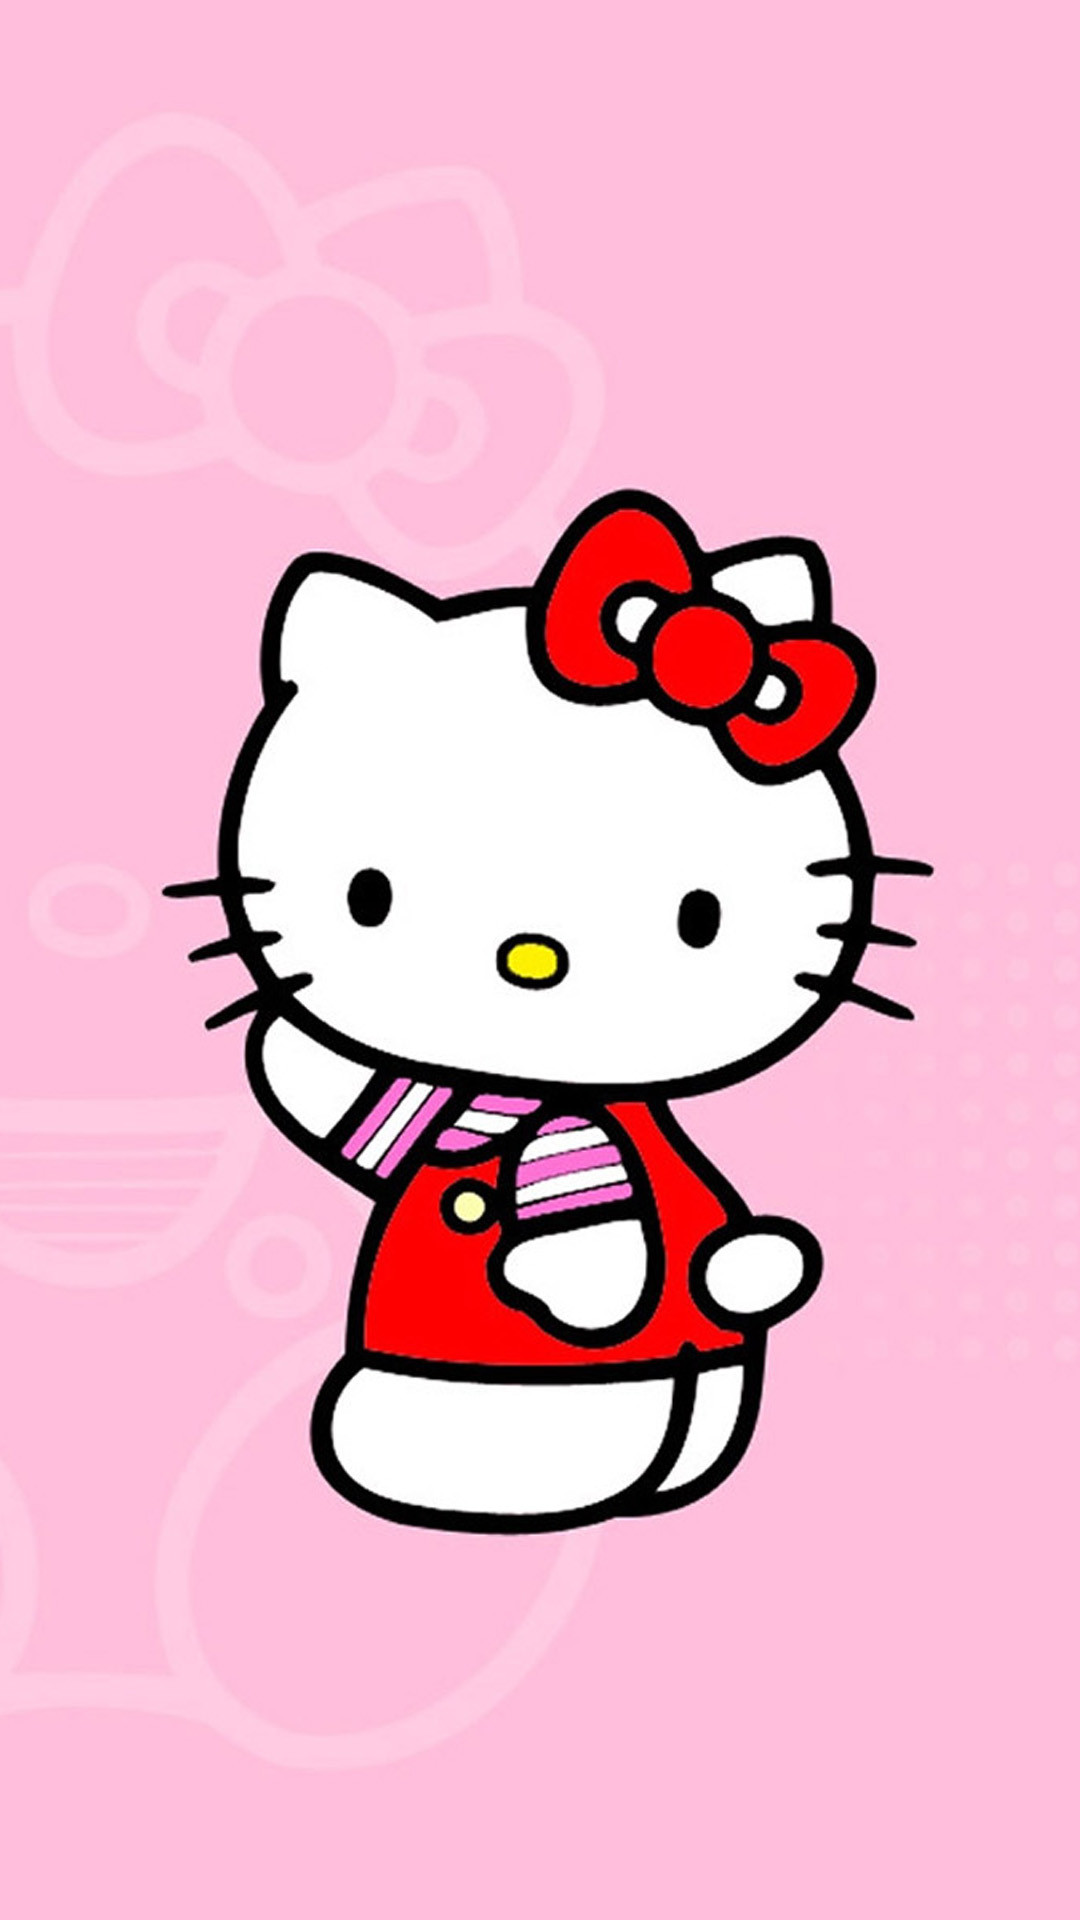 1080x1920 Hello Kitty Wallpapers 2015 Iphone - The Wallpaper